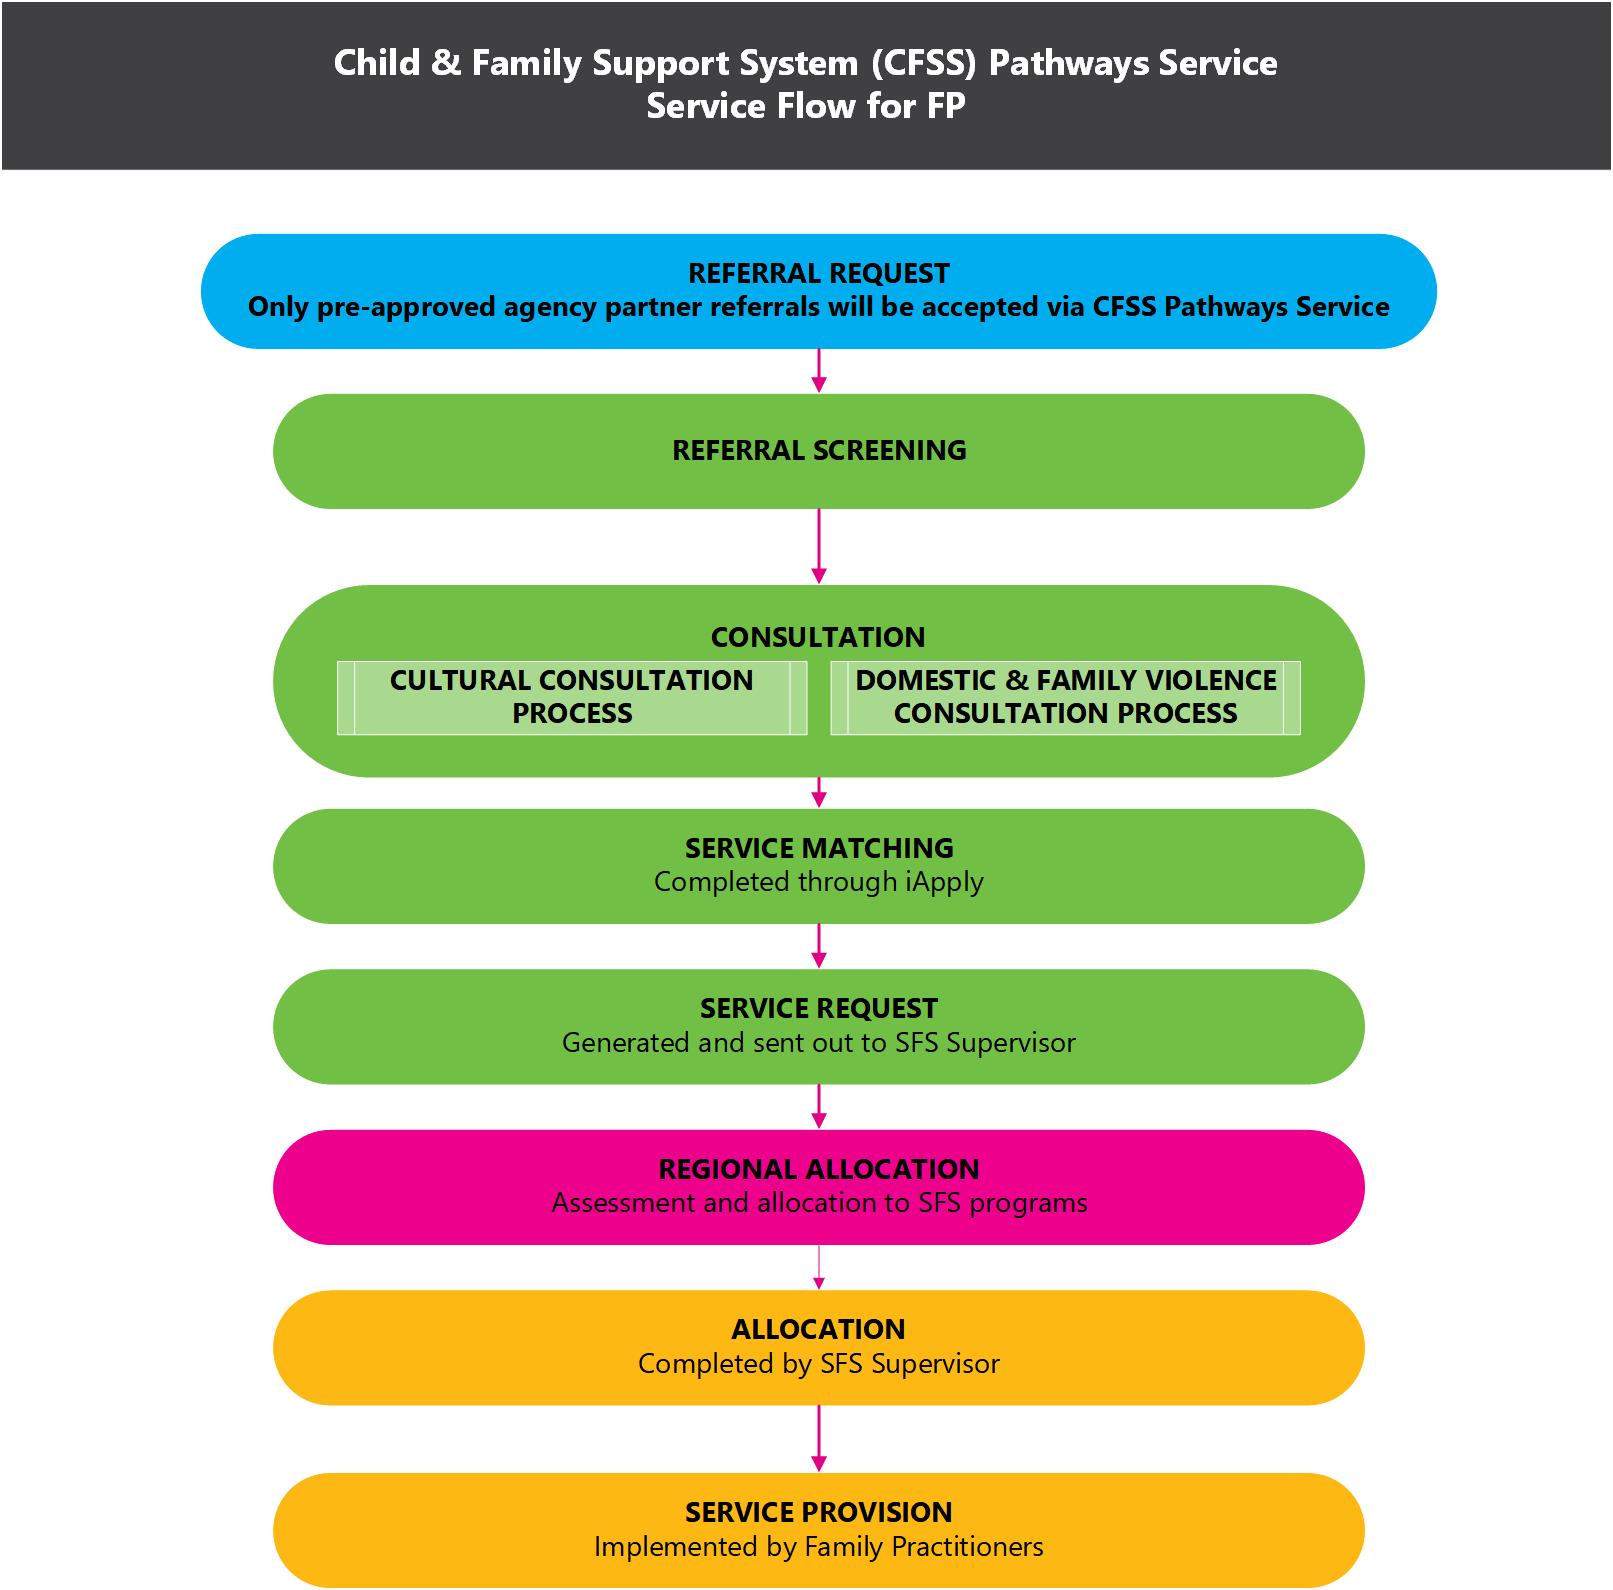 Family Practitioner Service Flow. There is a link on this page to a plain text description.